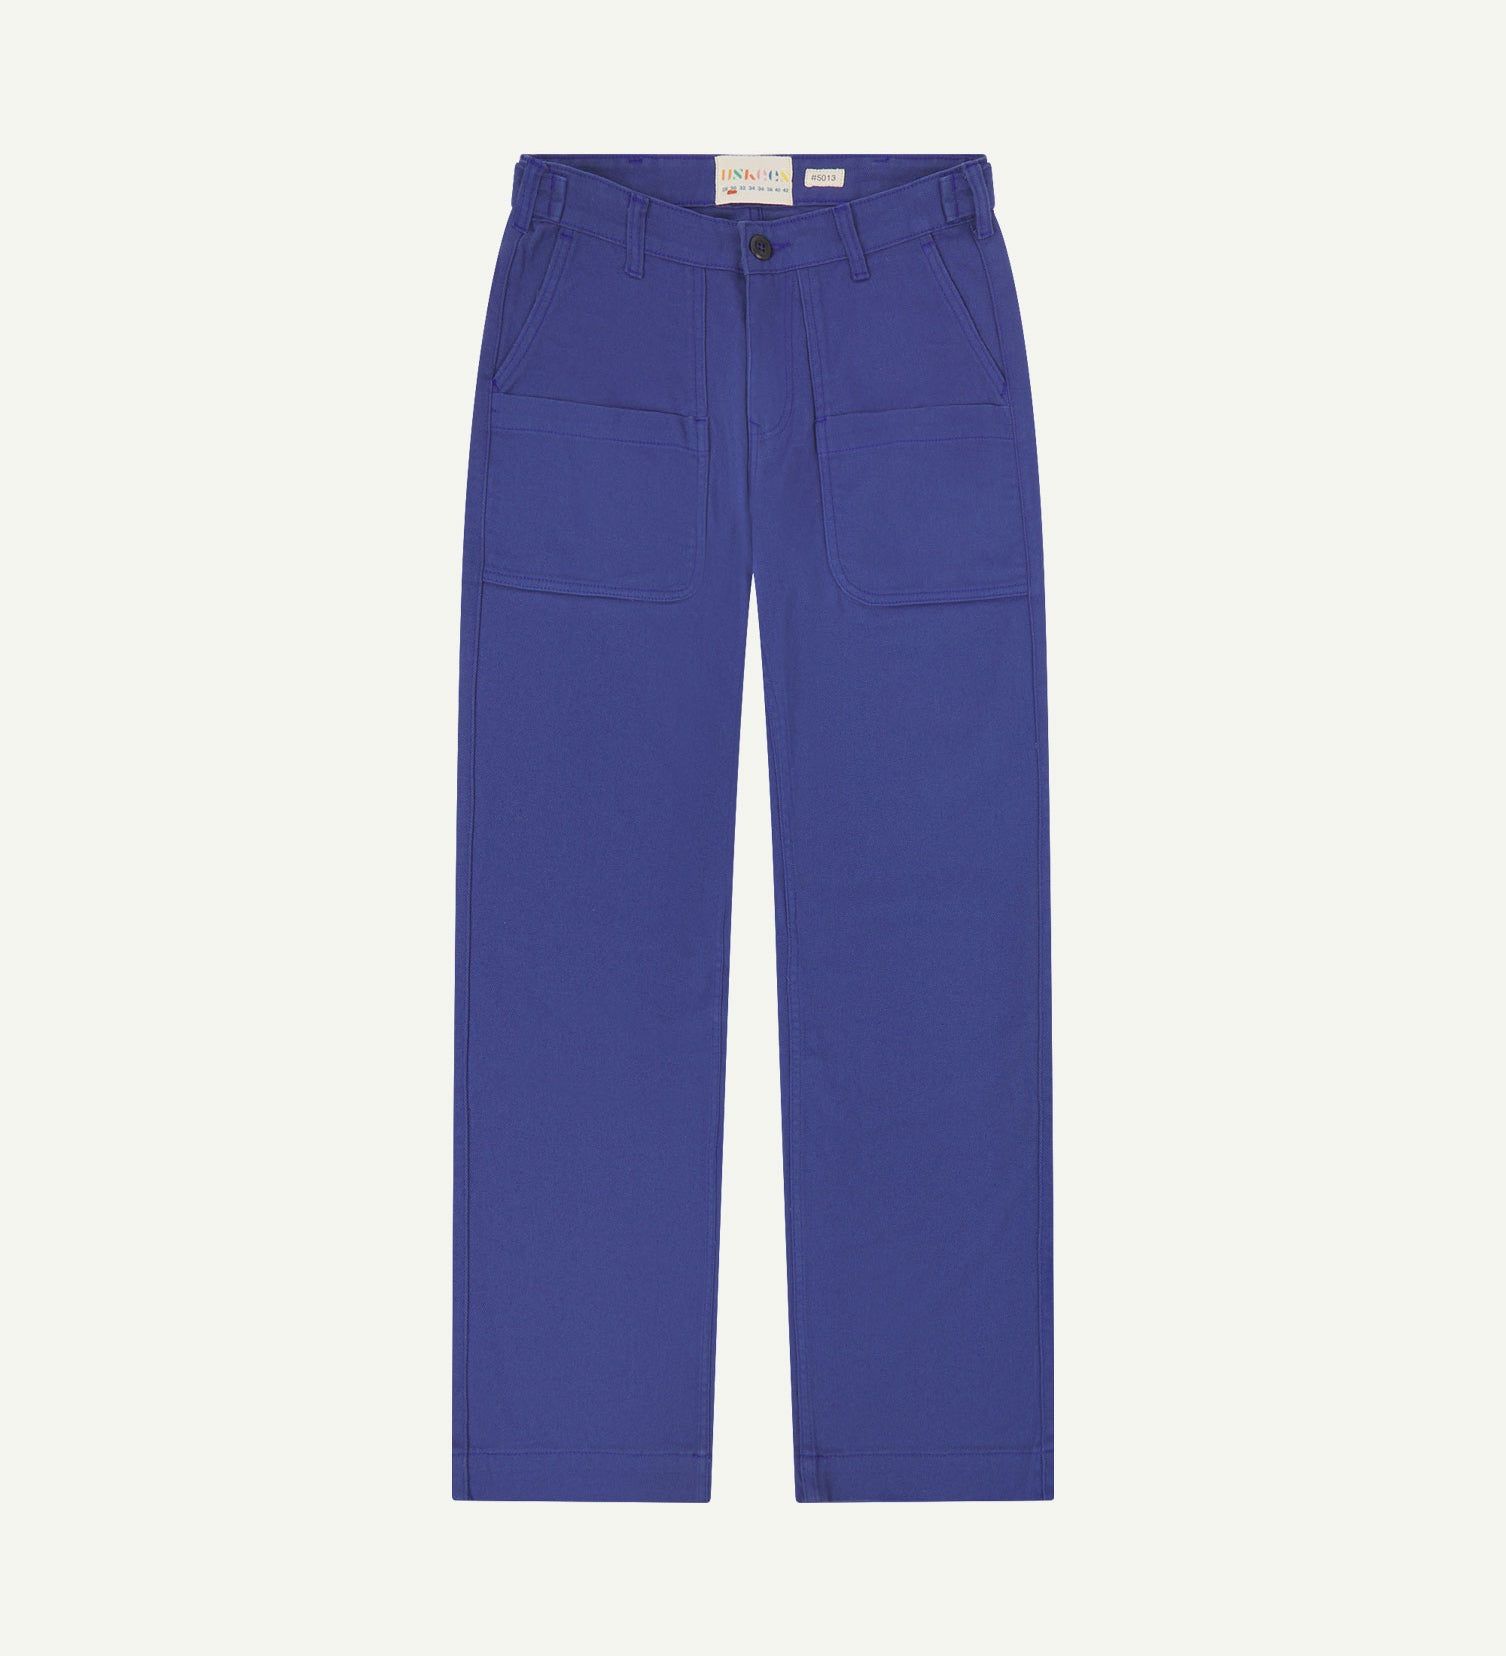 Front flat view of 5013 Uskees drill straight leg pants in ultra blue,with focus on front pockets, layered pockets, belt loops and Uskees branding label.